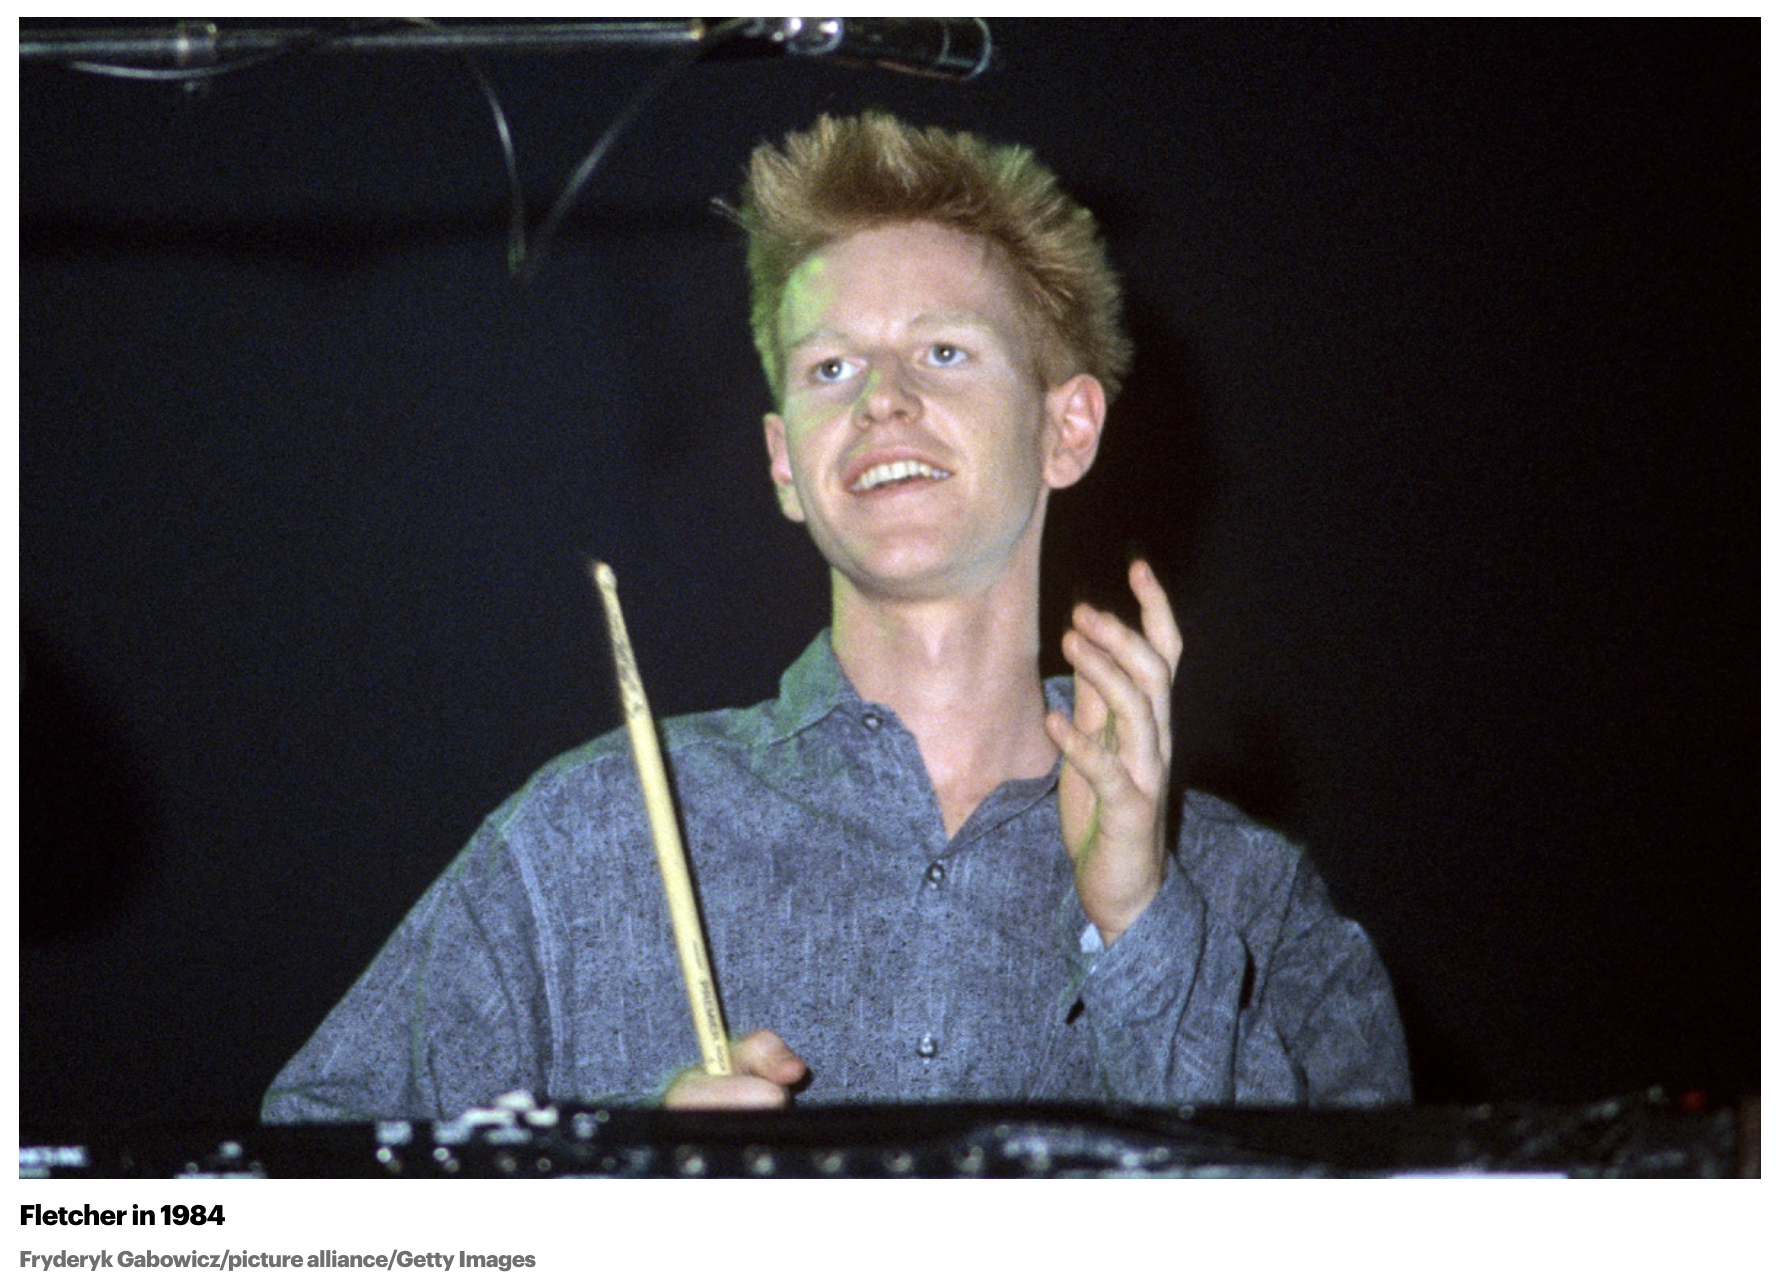 Farewell Andy Fletcher: A Toast to Depeche Mode’s Quiet One